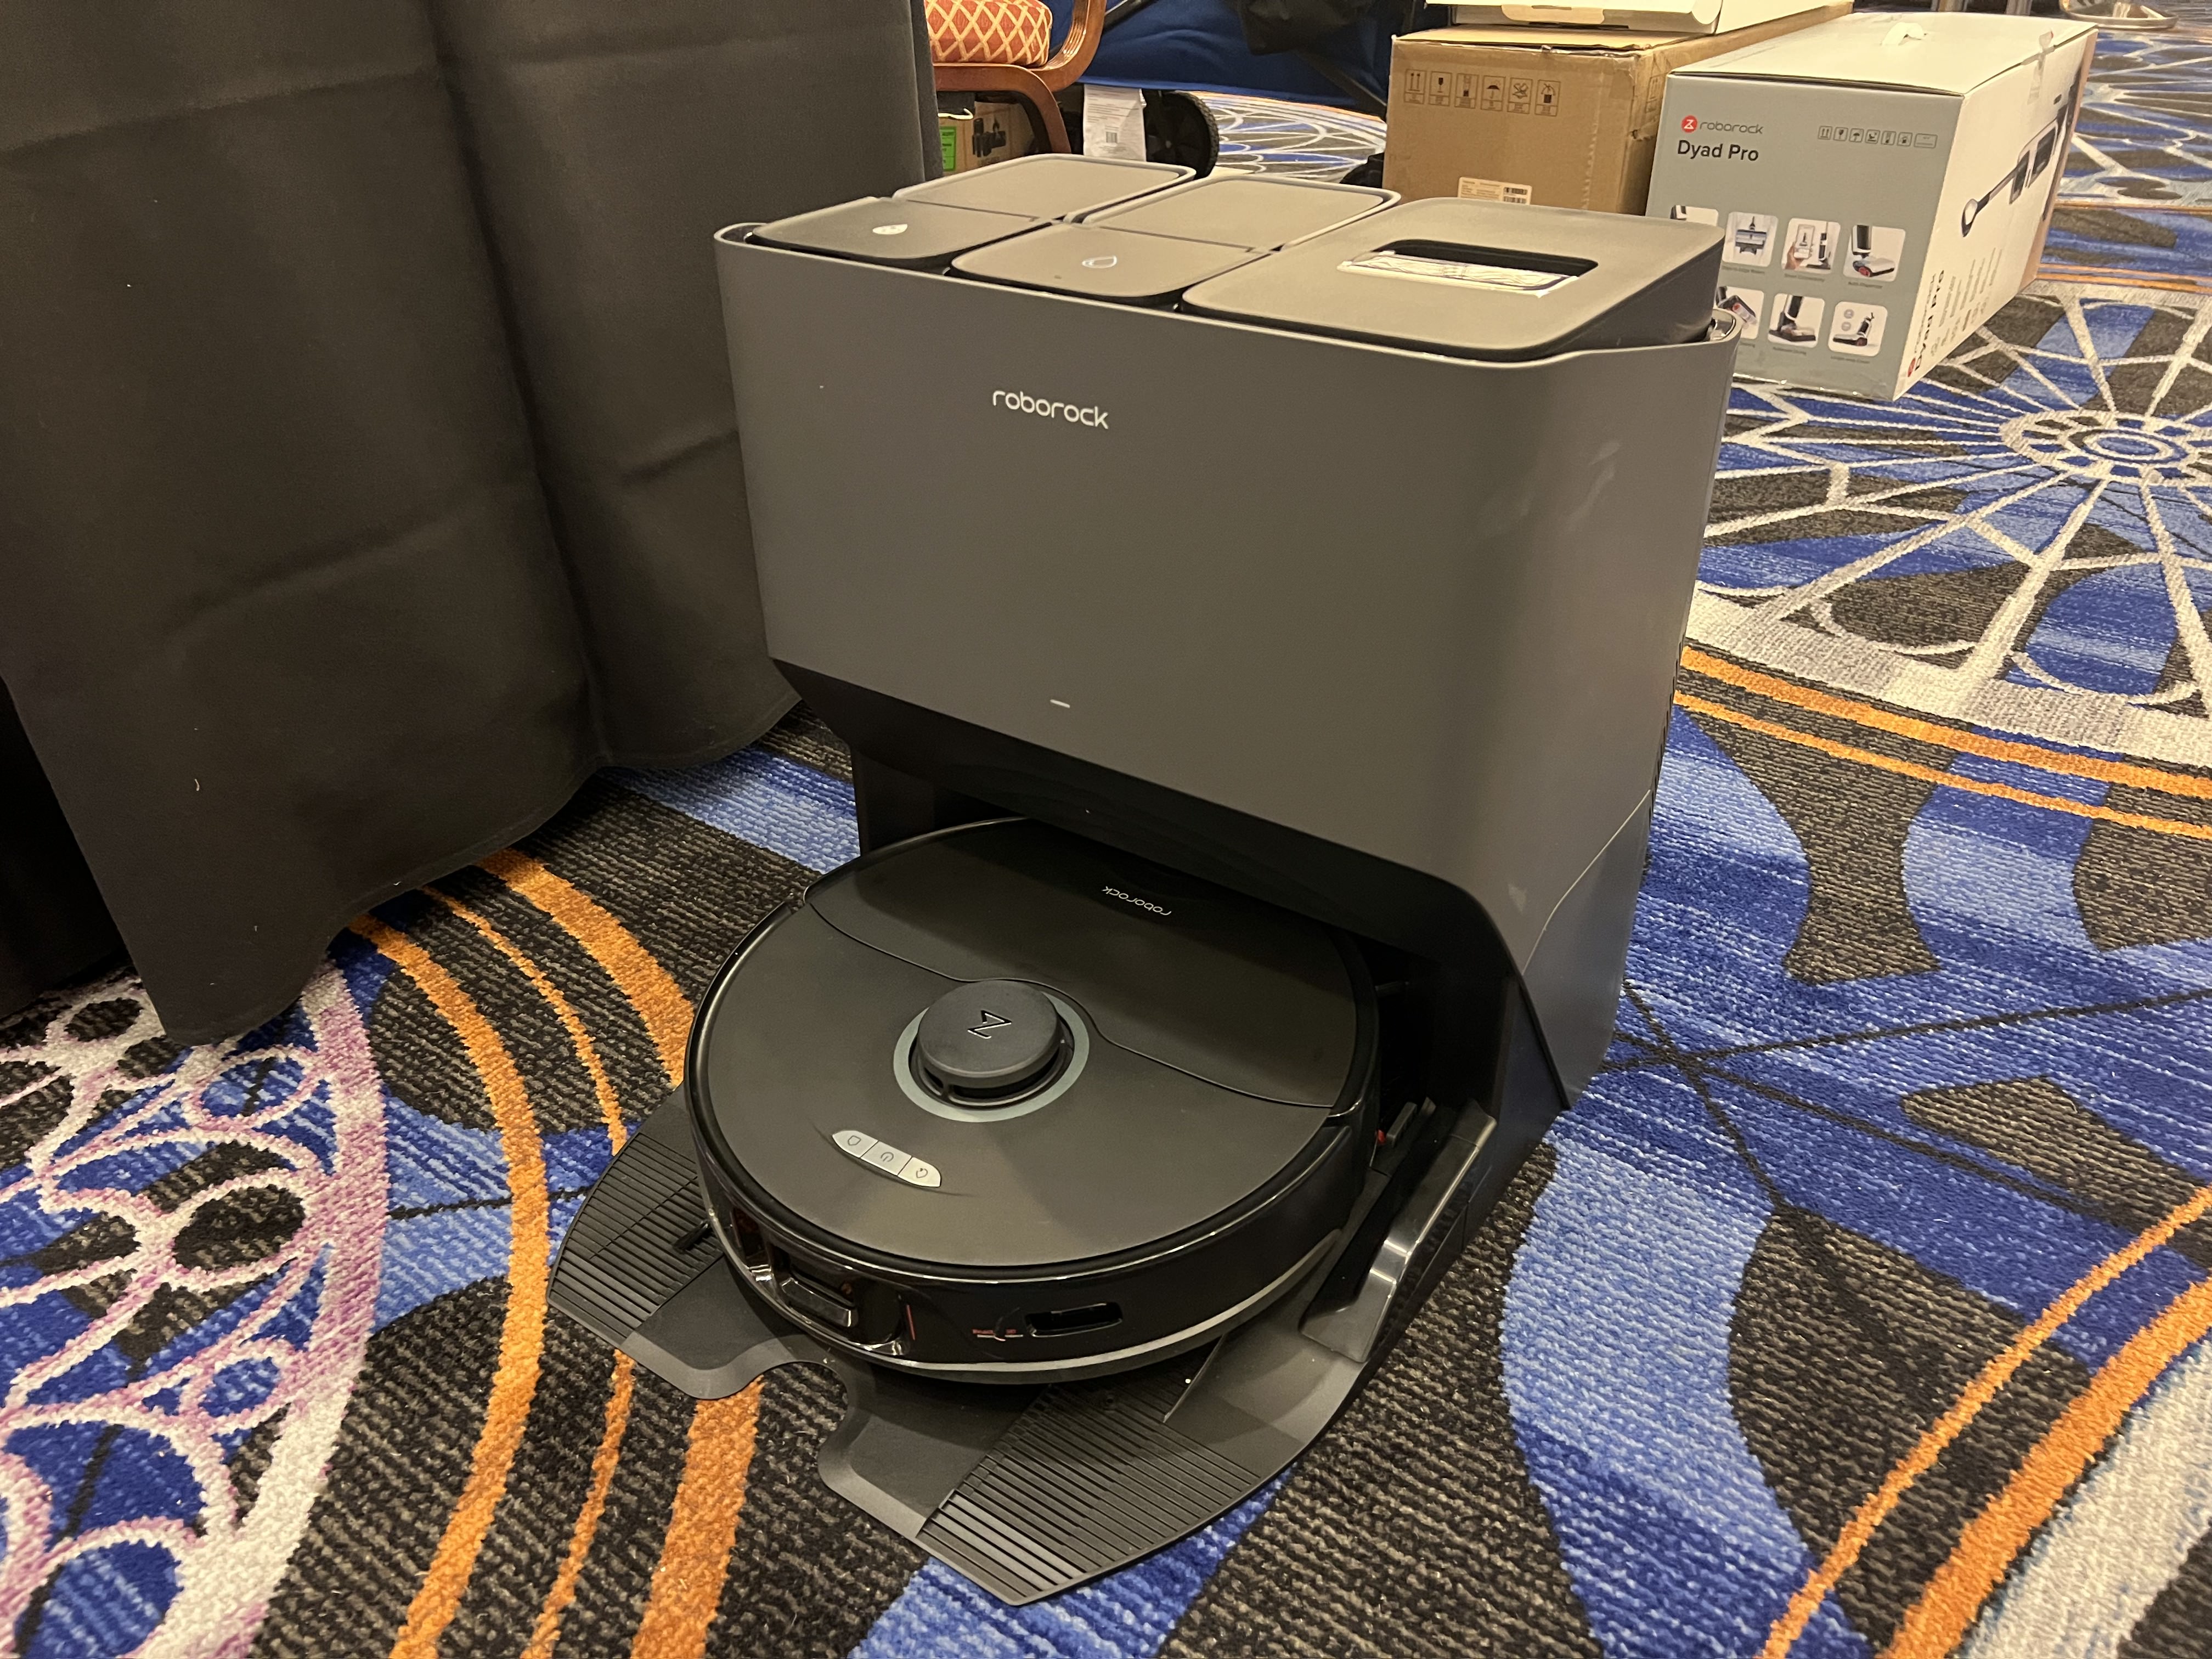 The Roborock S8 Ultra includes a new charging dock with a hot air dryer for the mopping pad.